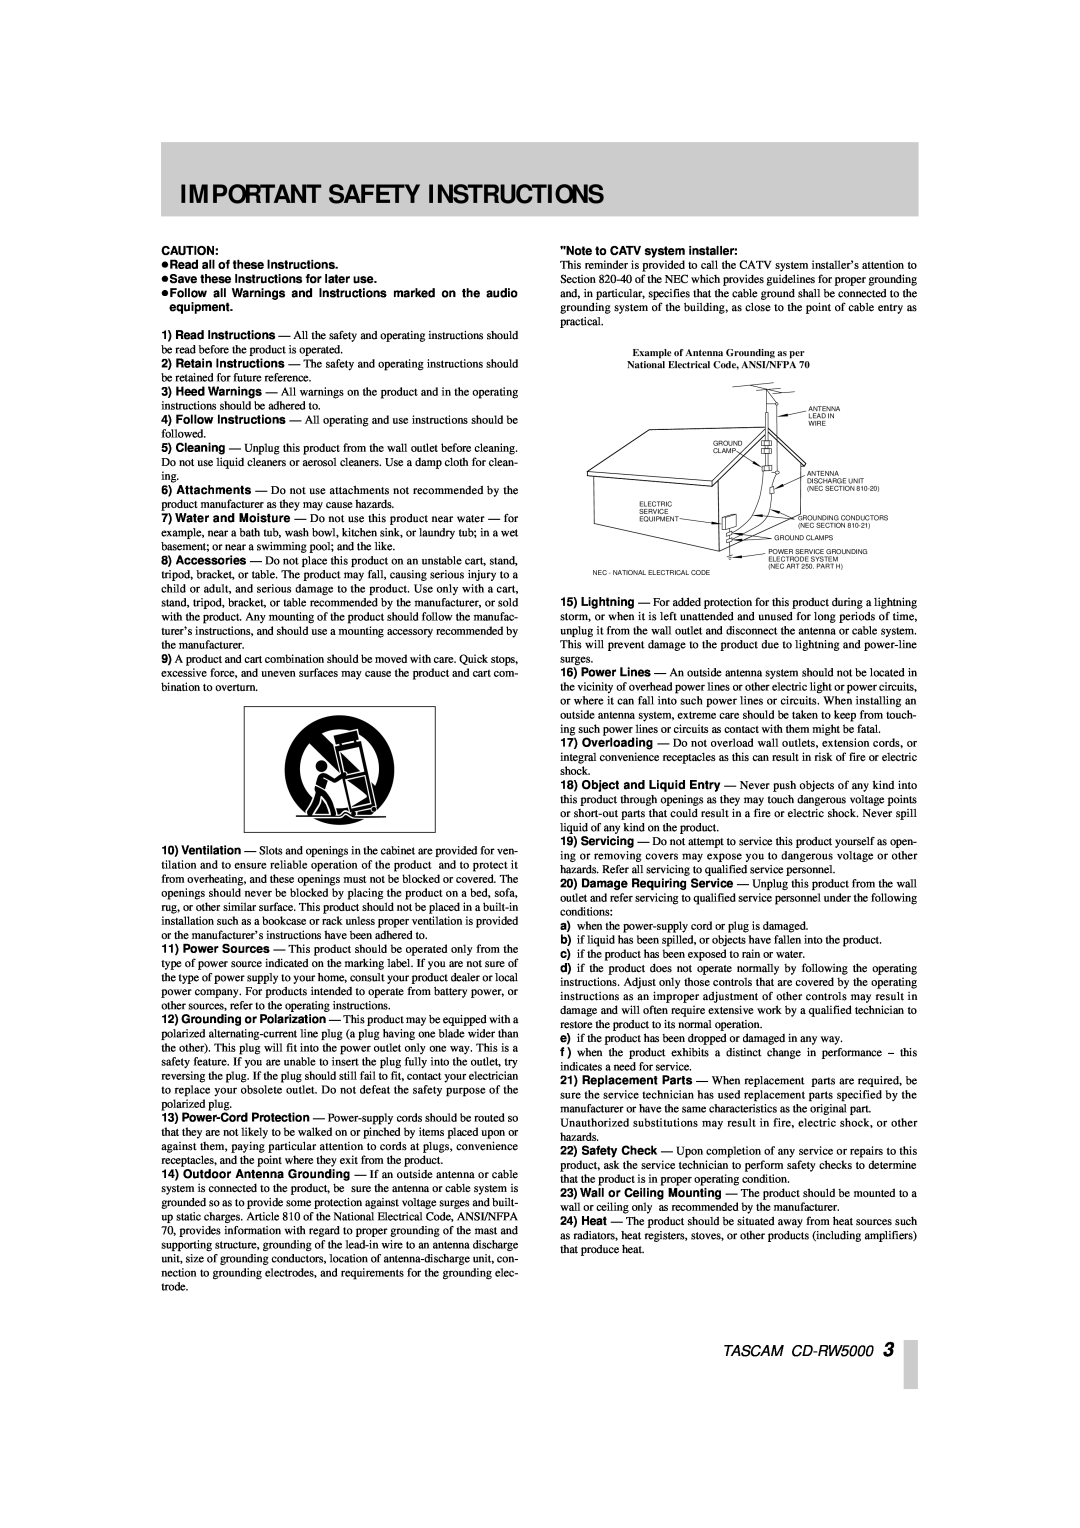 Tascam Important Safety Instructions, TASCAM CD-RW5000, ÉRead all of these Instructions, Note to CATV system installer 